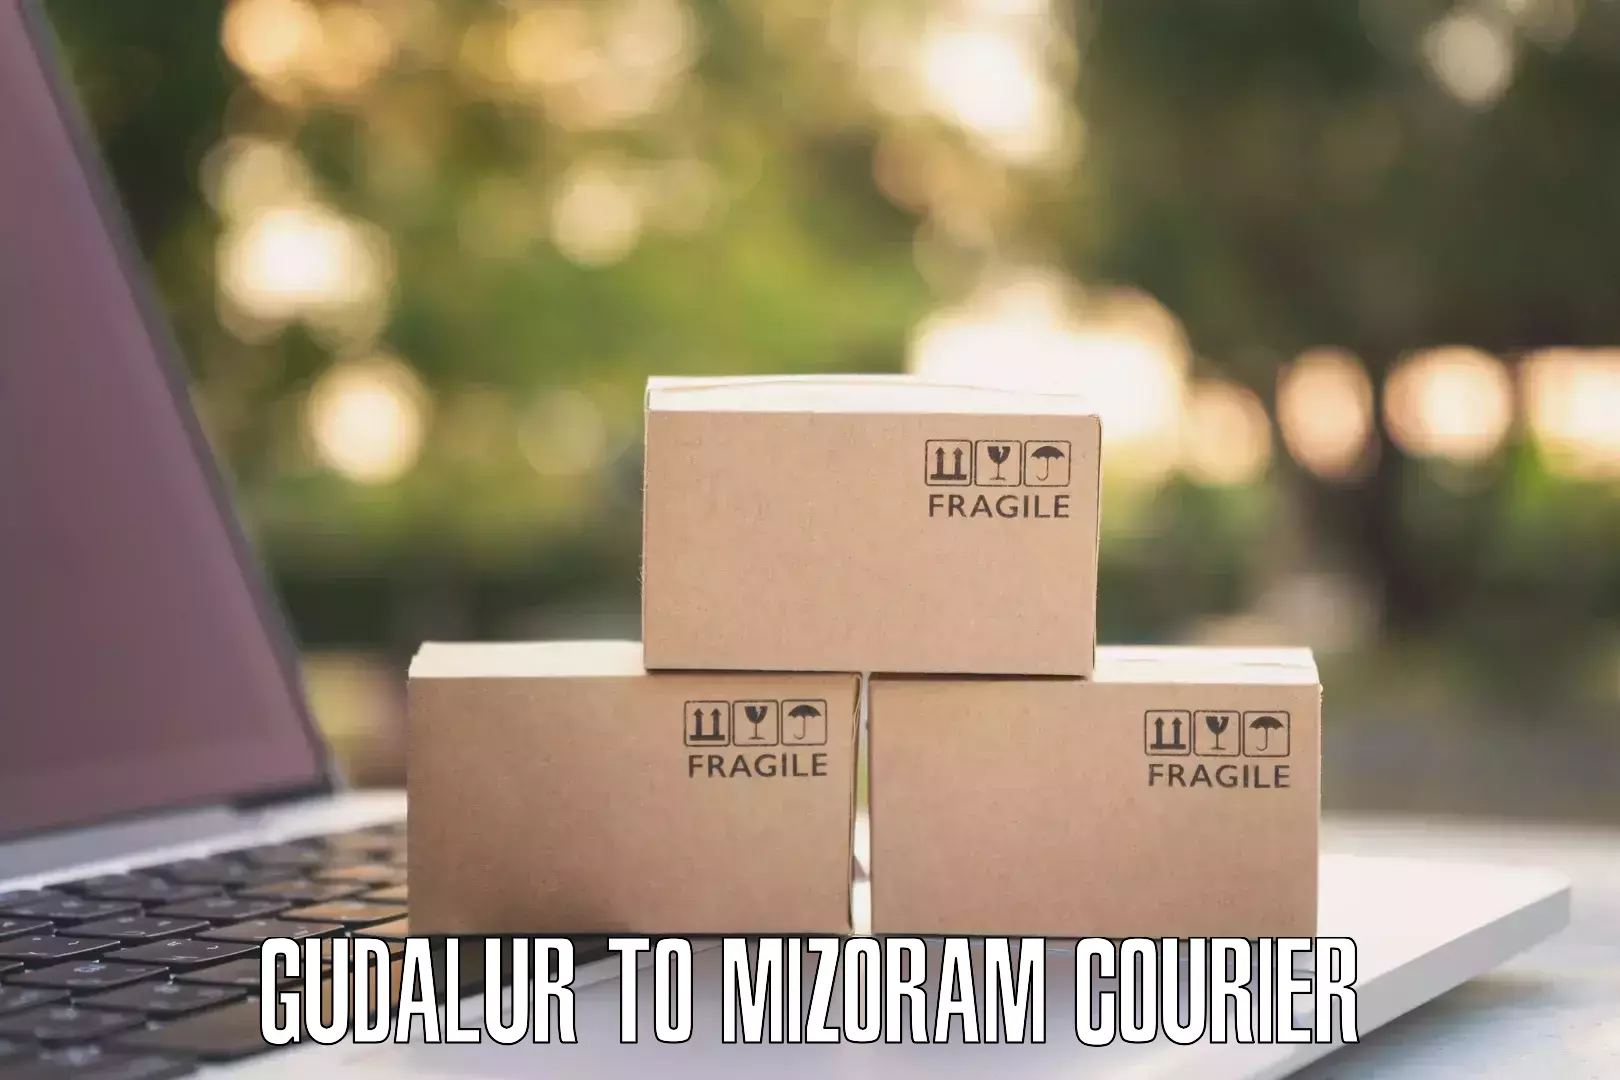 Customer-oriented courier services Gudalur to Mizoram